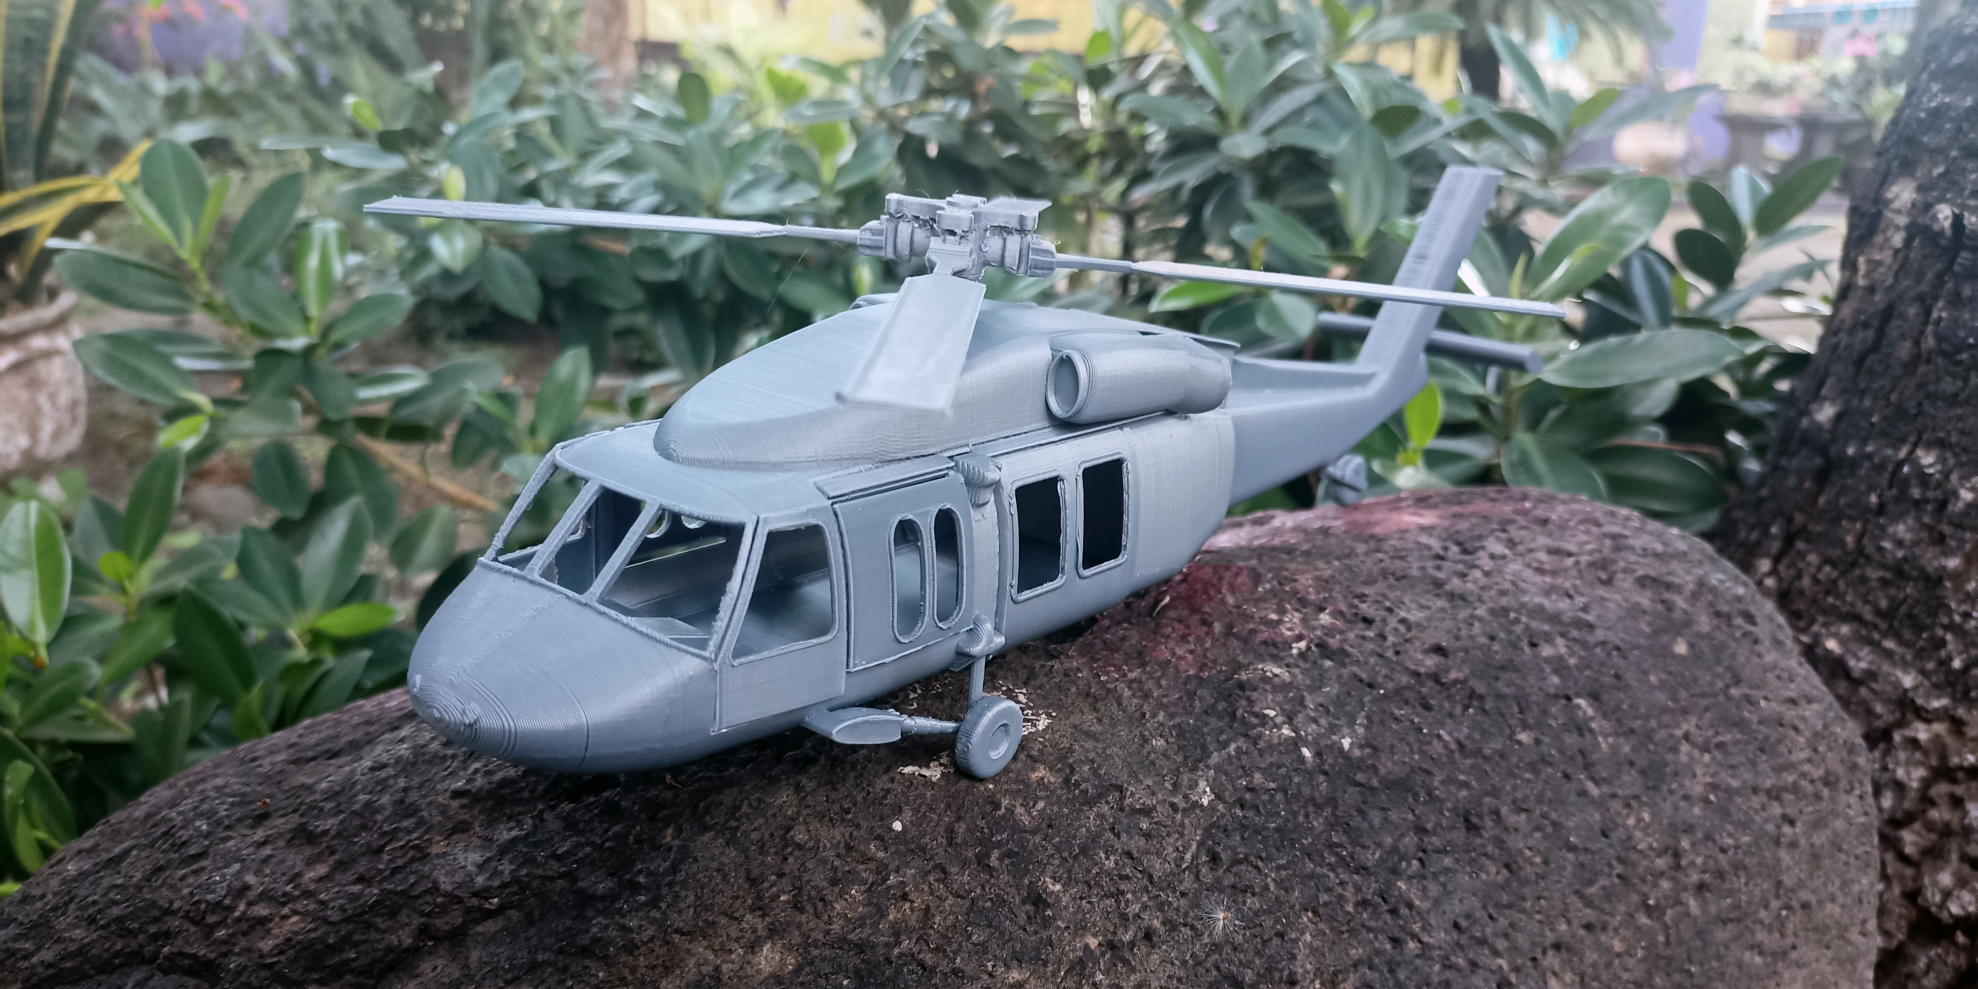 Find here a selection of helicopters 3D designs that can be made with 3D printing.